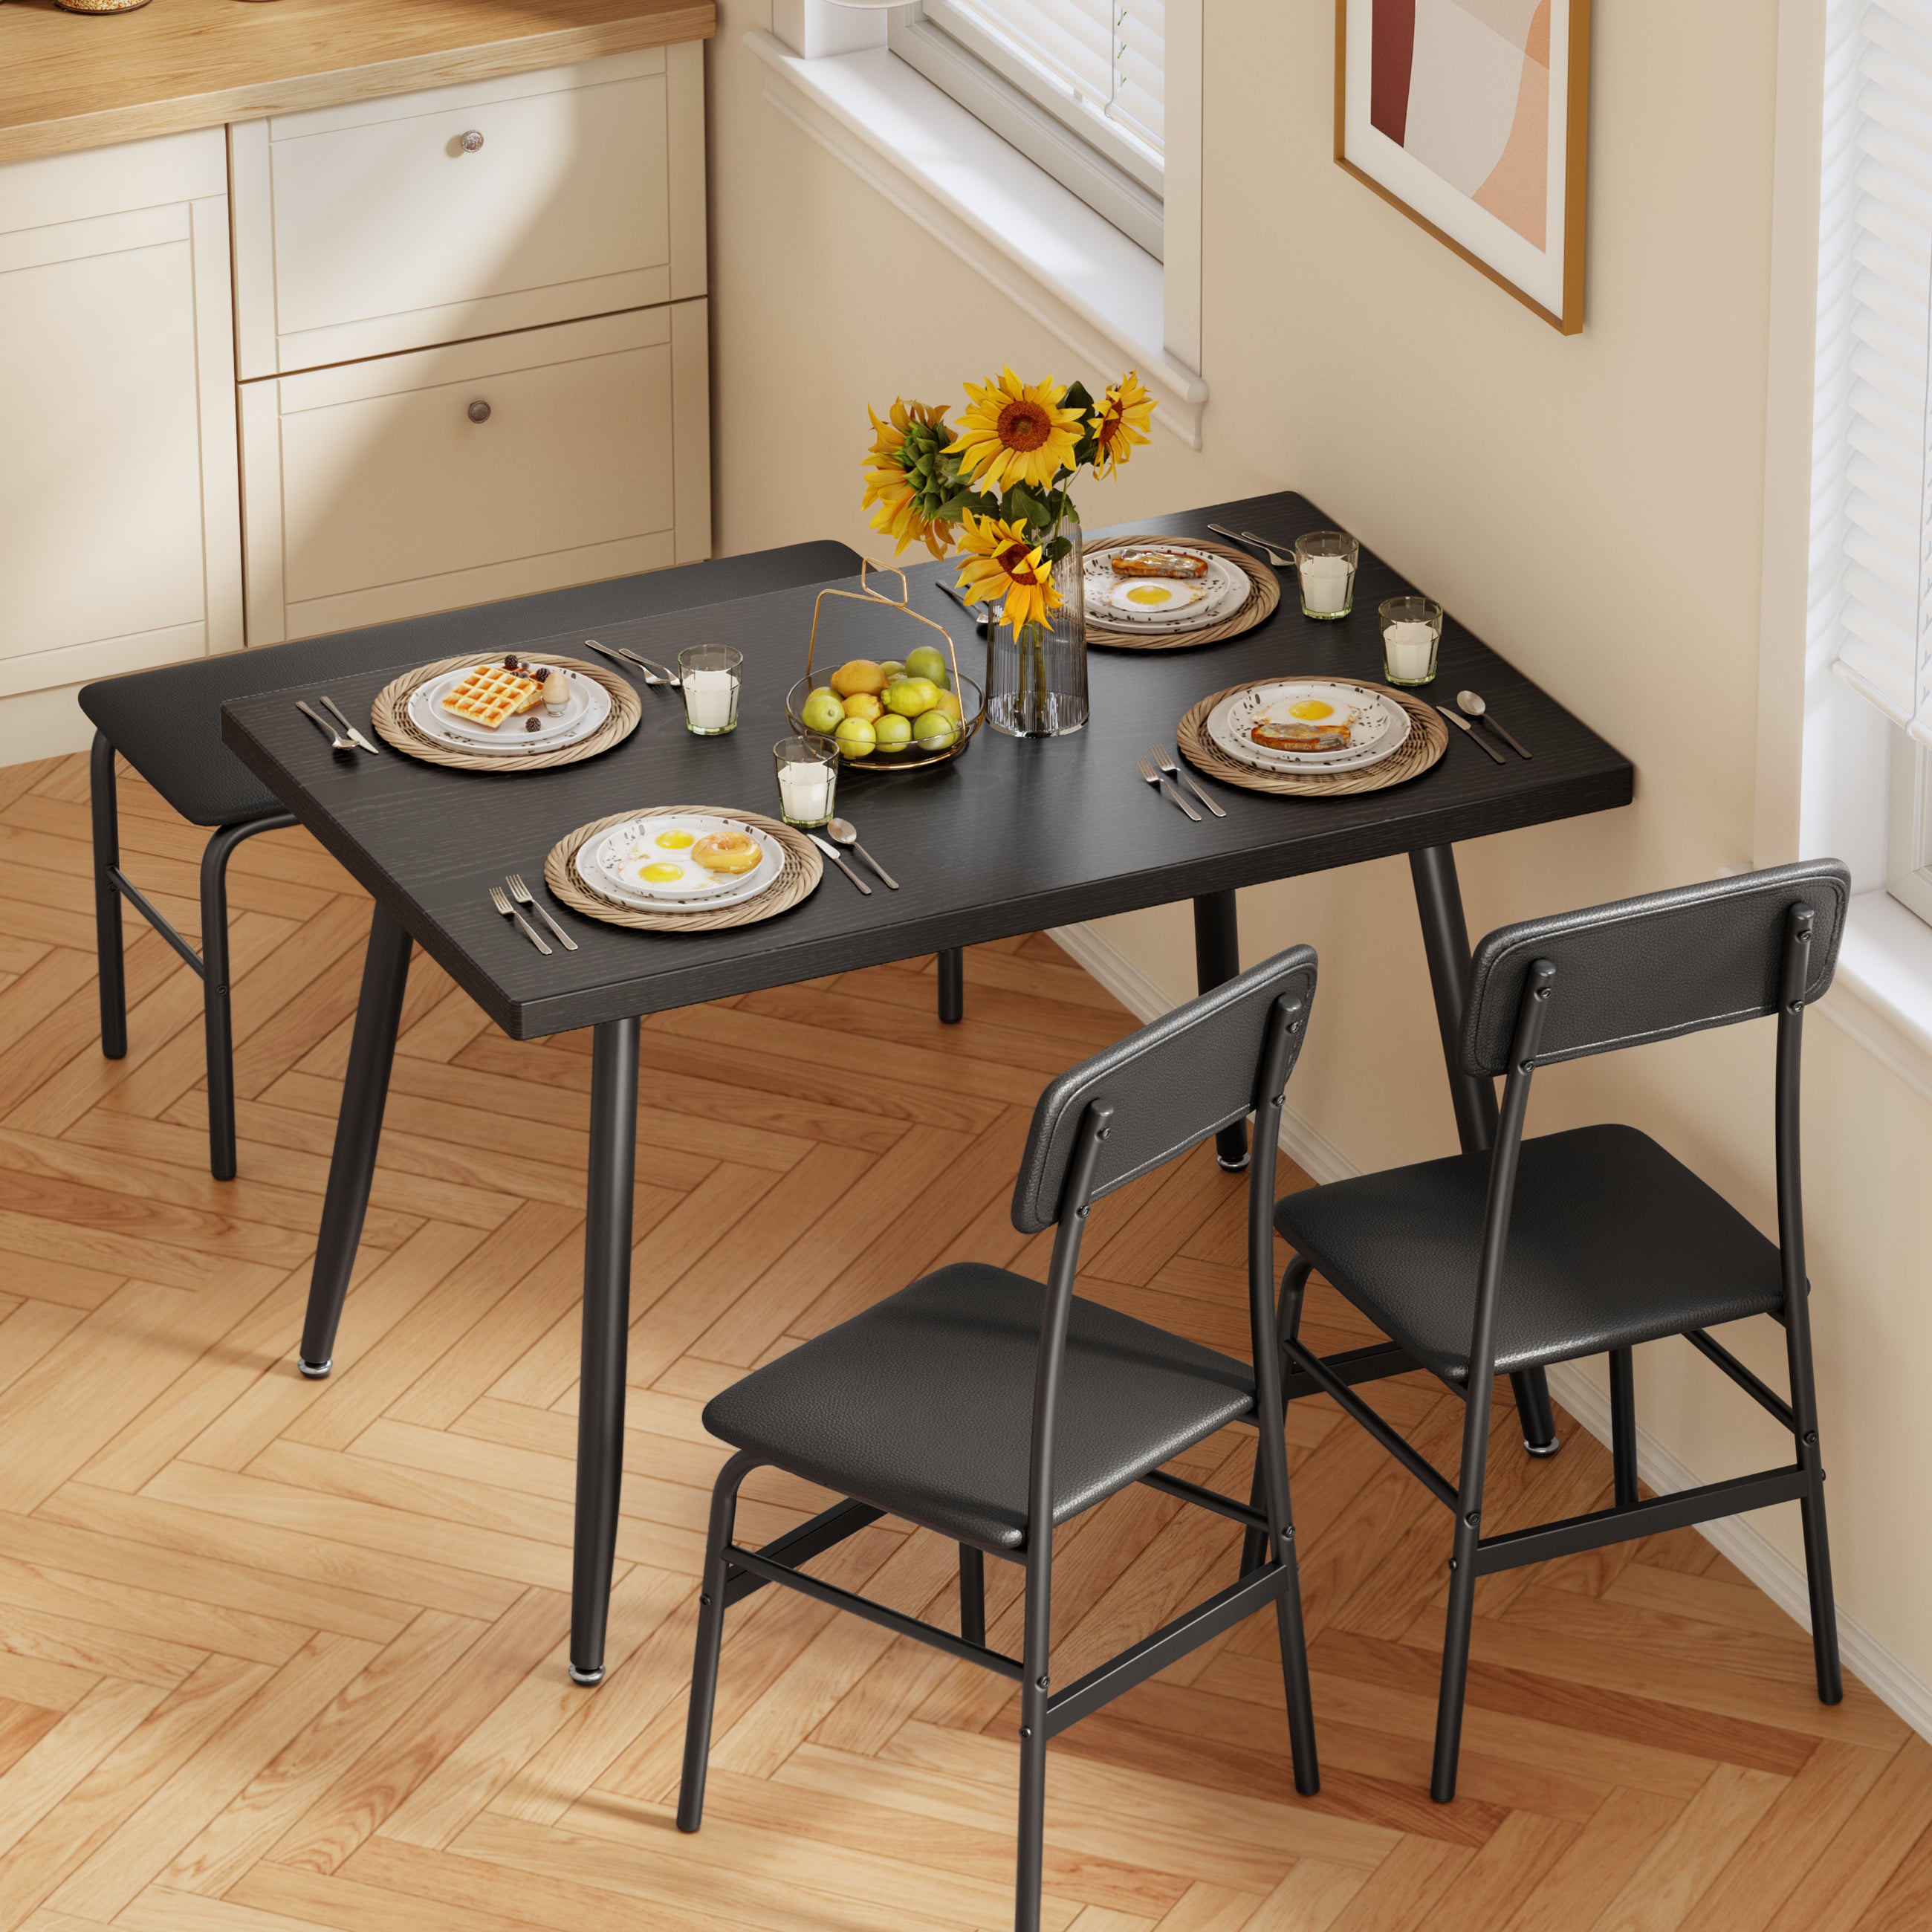 Gizoon TB80 Dining Table Set for 4 with Bench and 2 Chairs